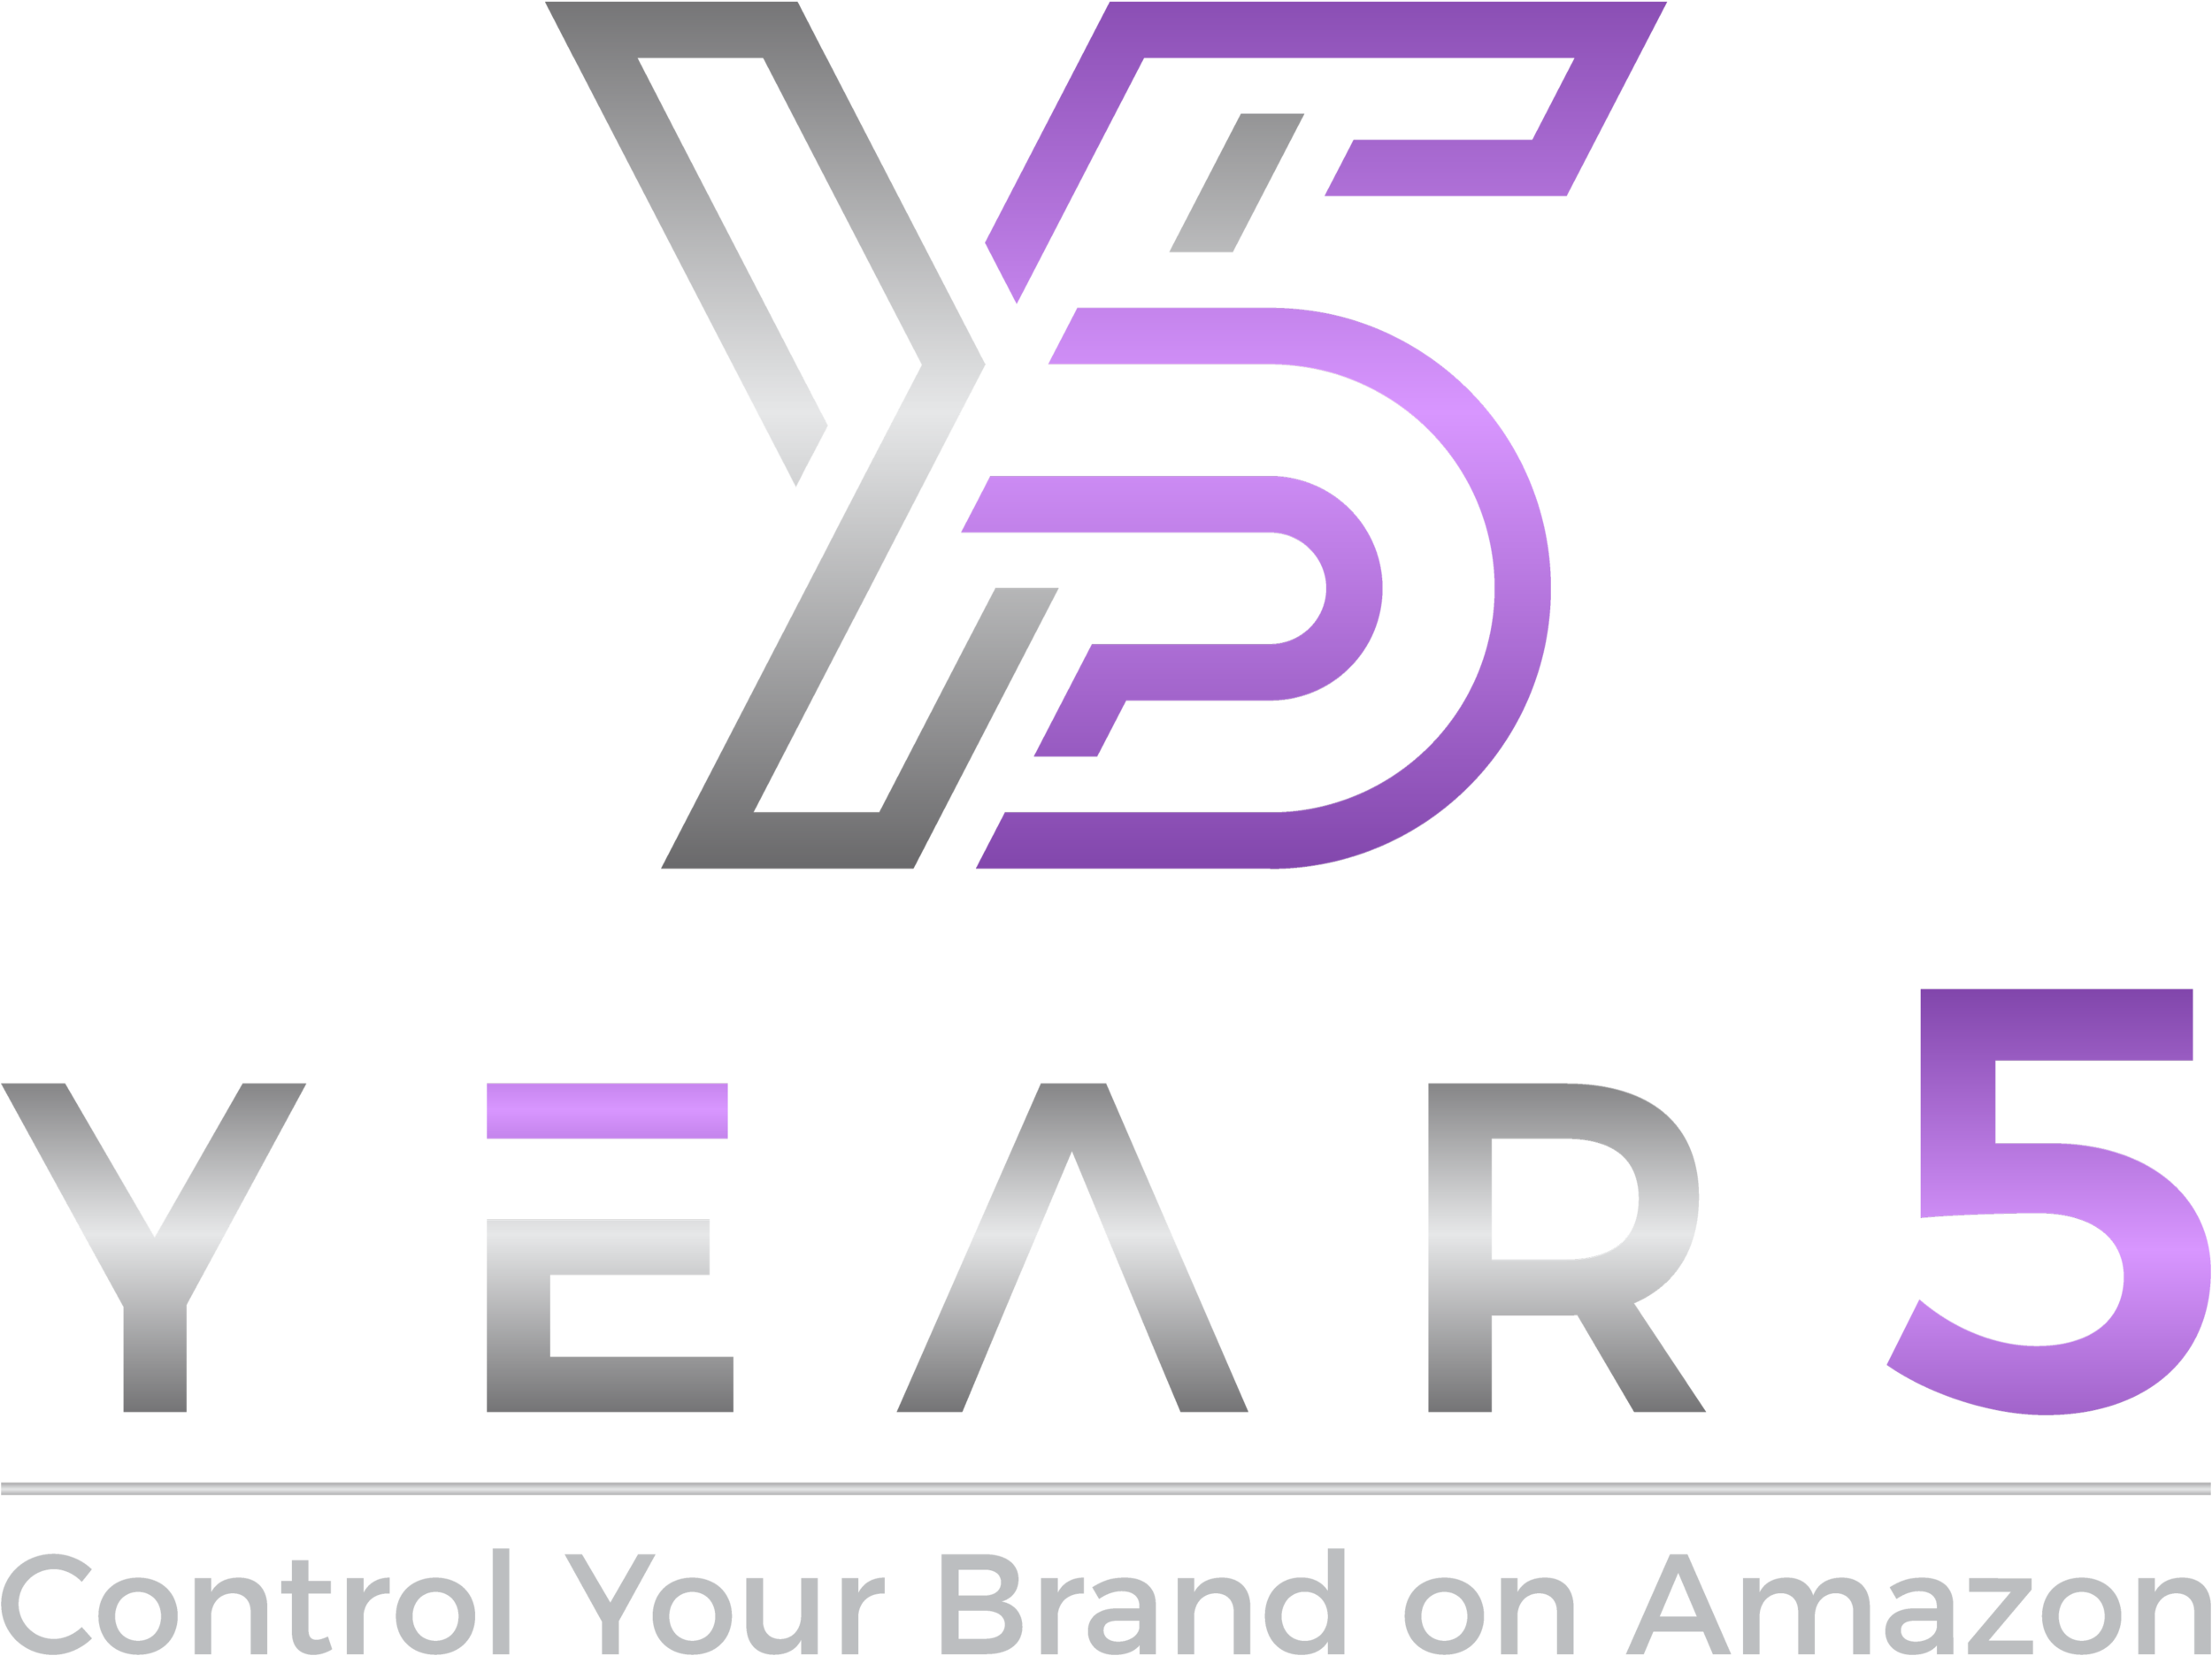 Year 5 - Take Control of your brand on Amazon